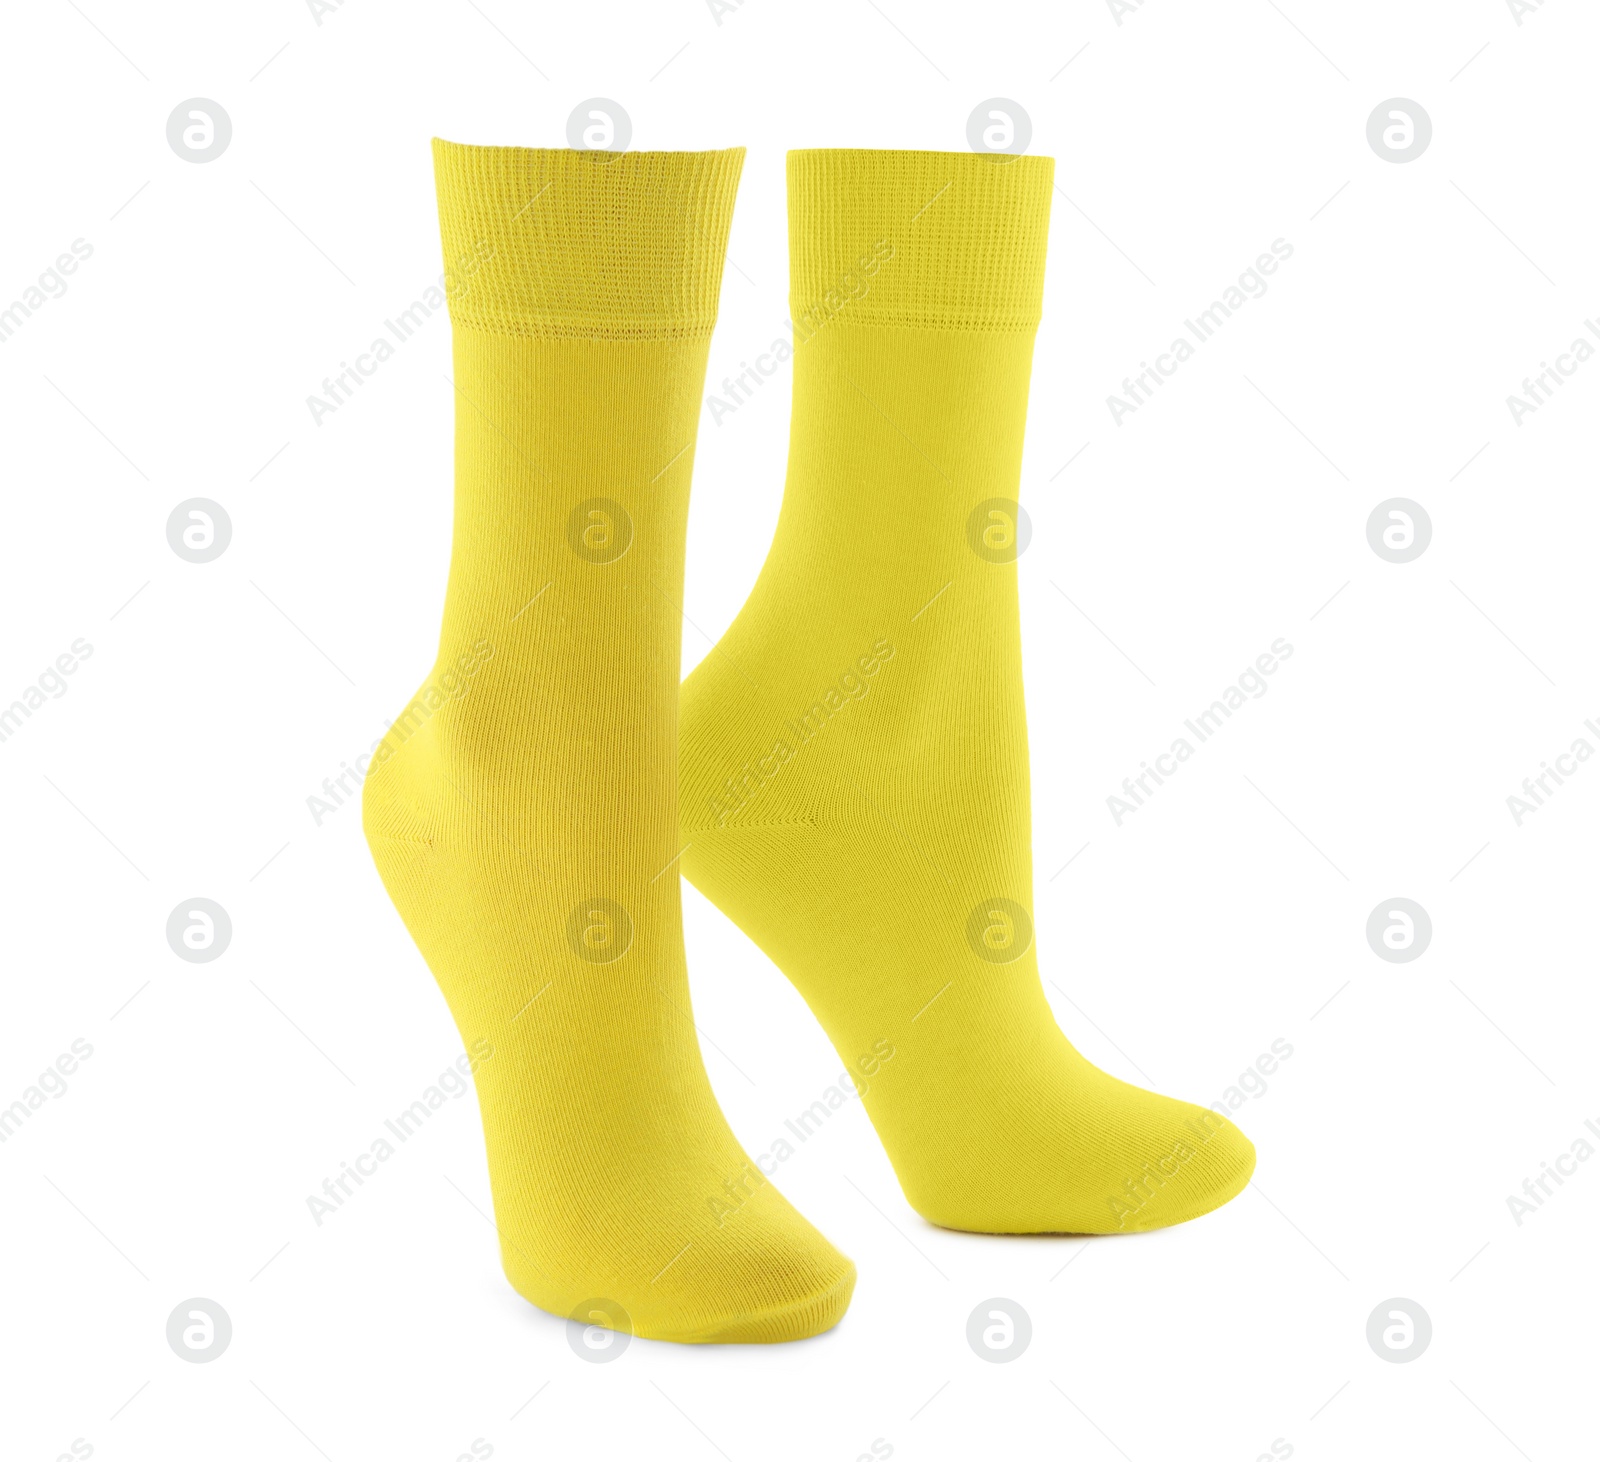 Image of Pair of bright yellow socks isolated on white